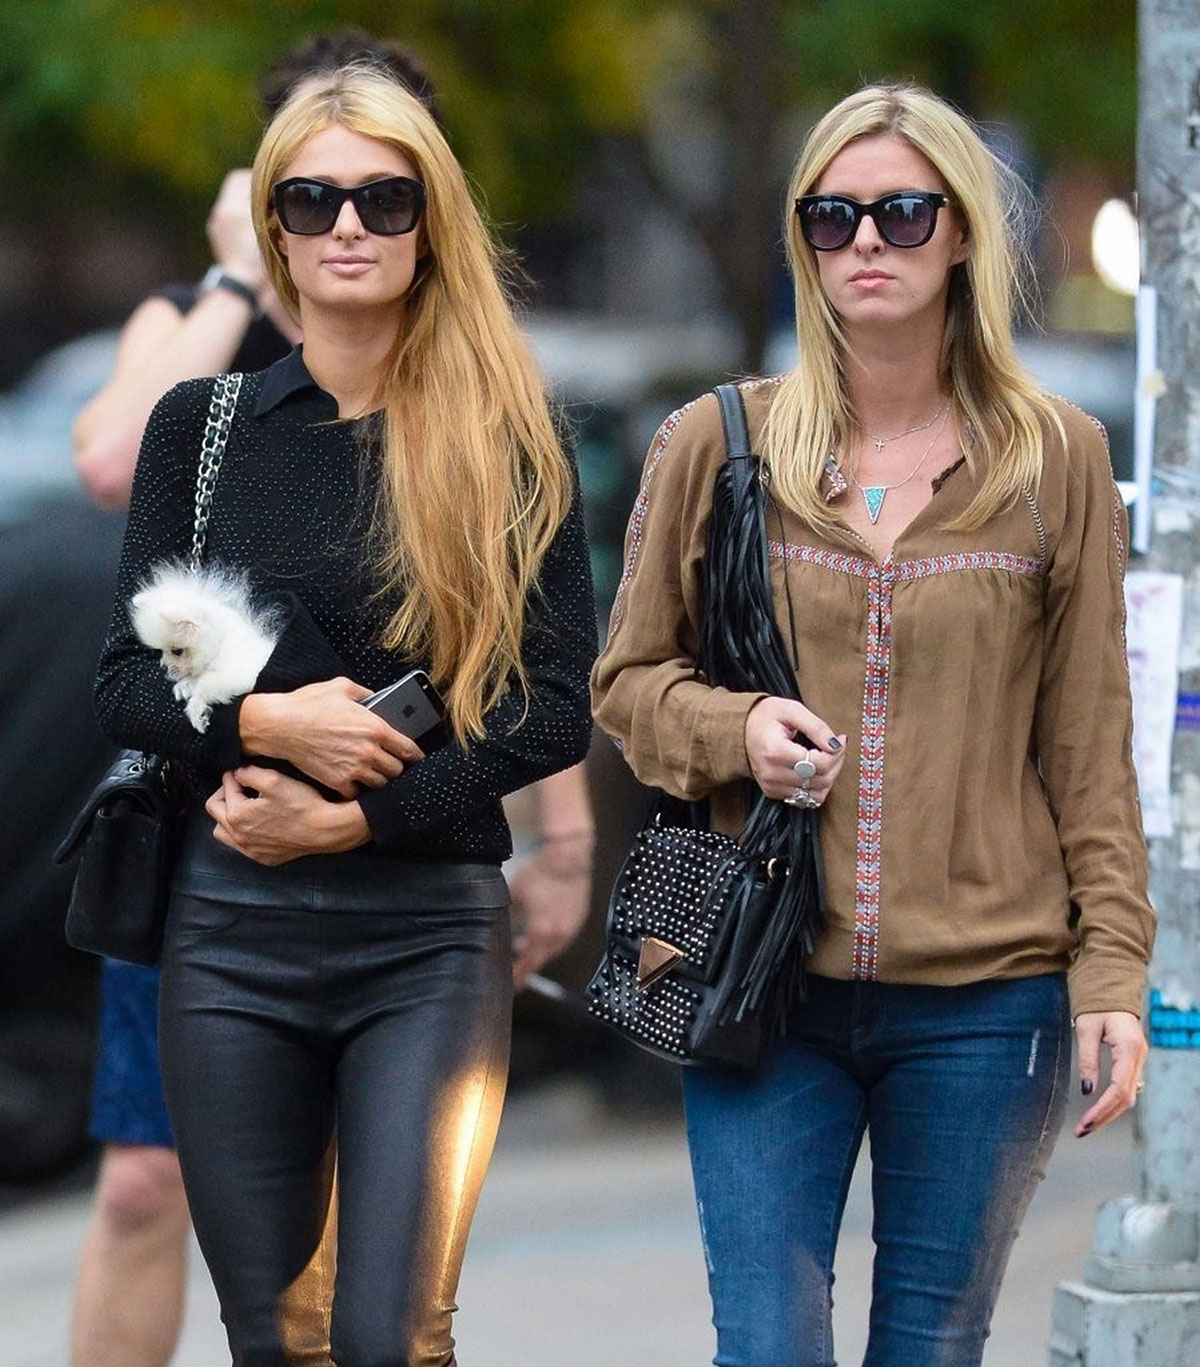 Paris and Nicky Hilton were spotted in New York City